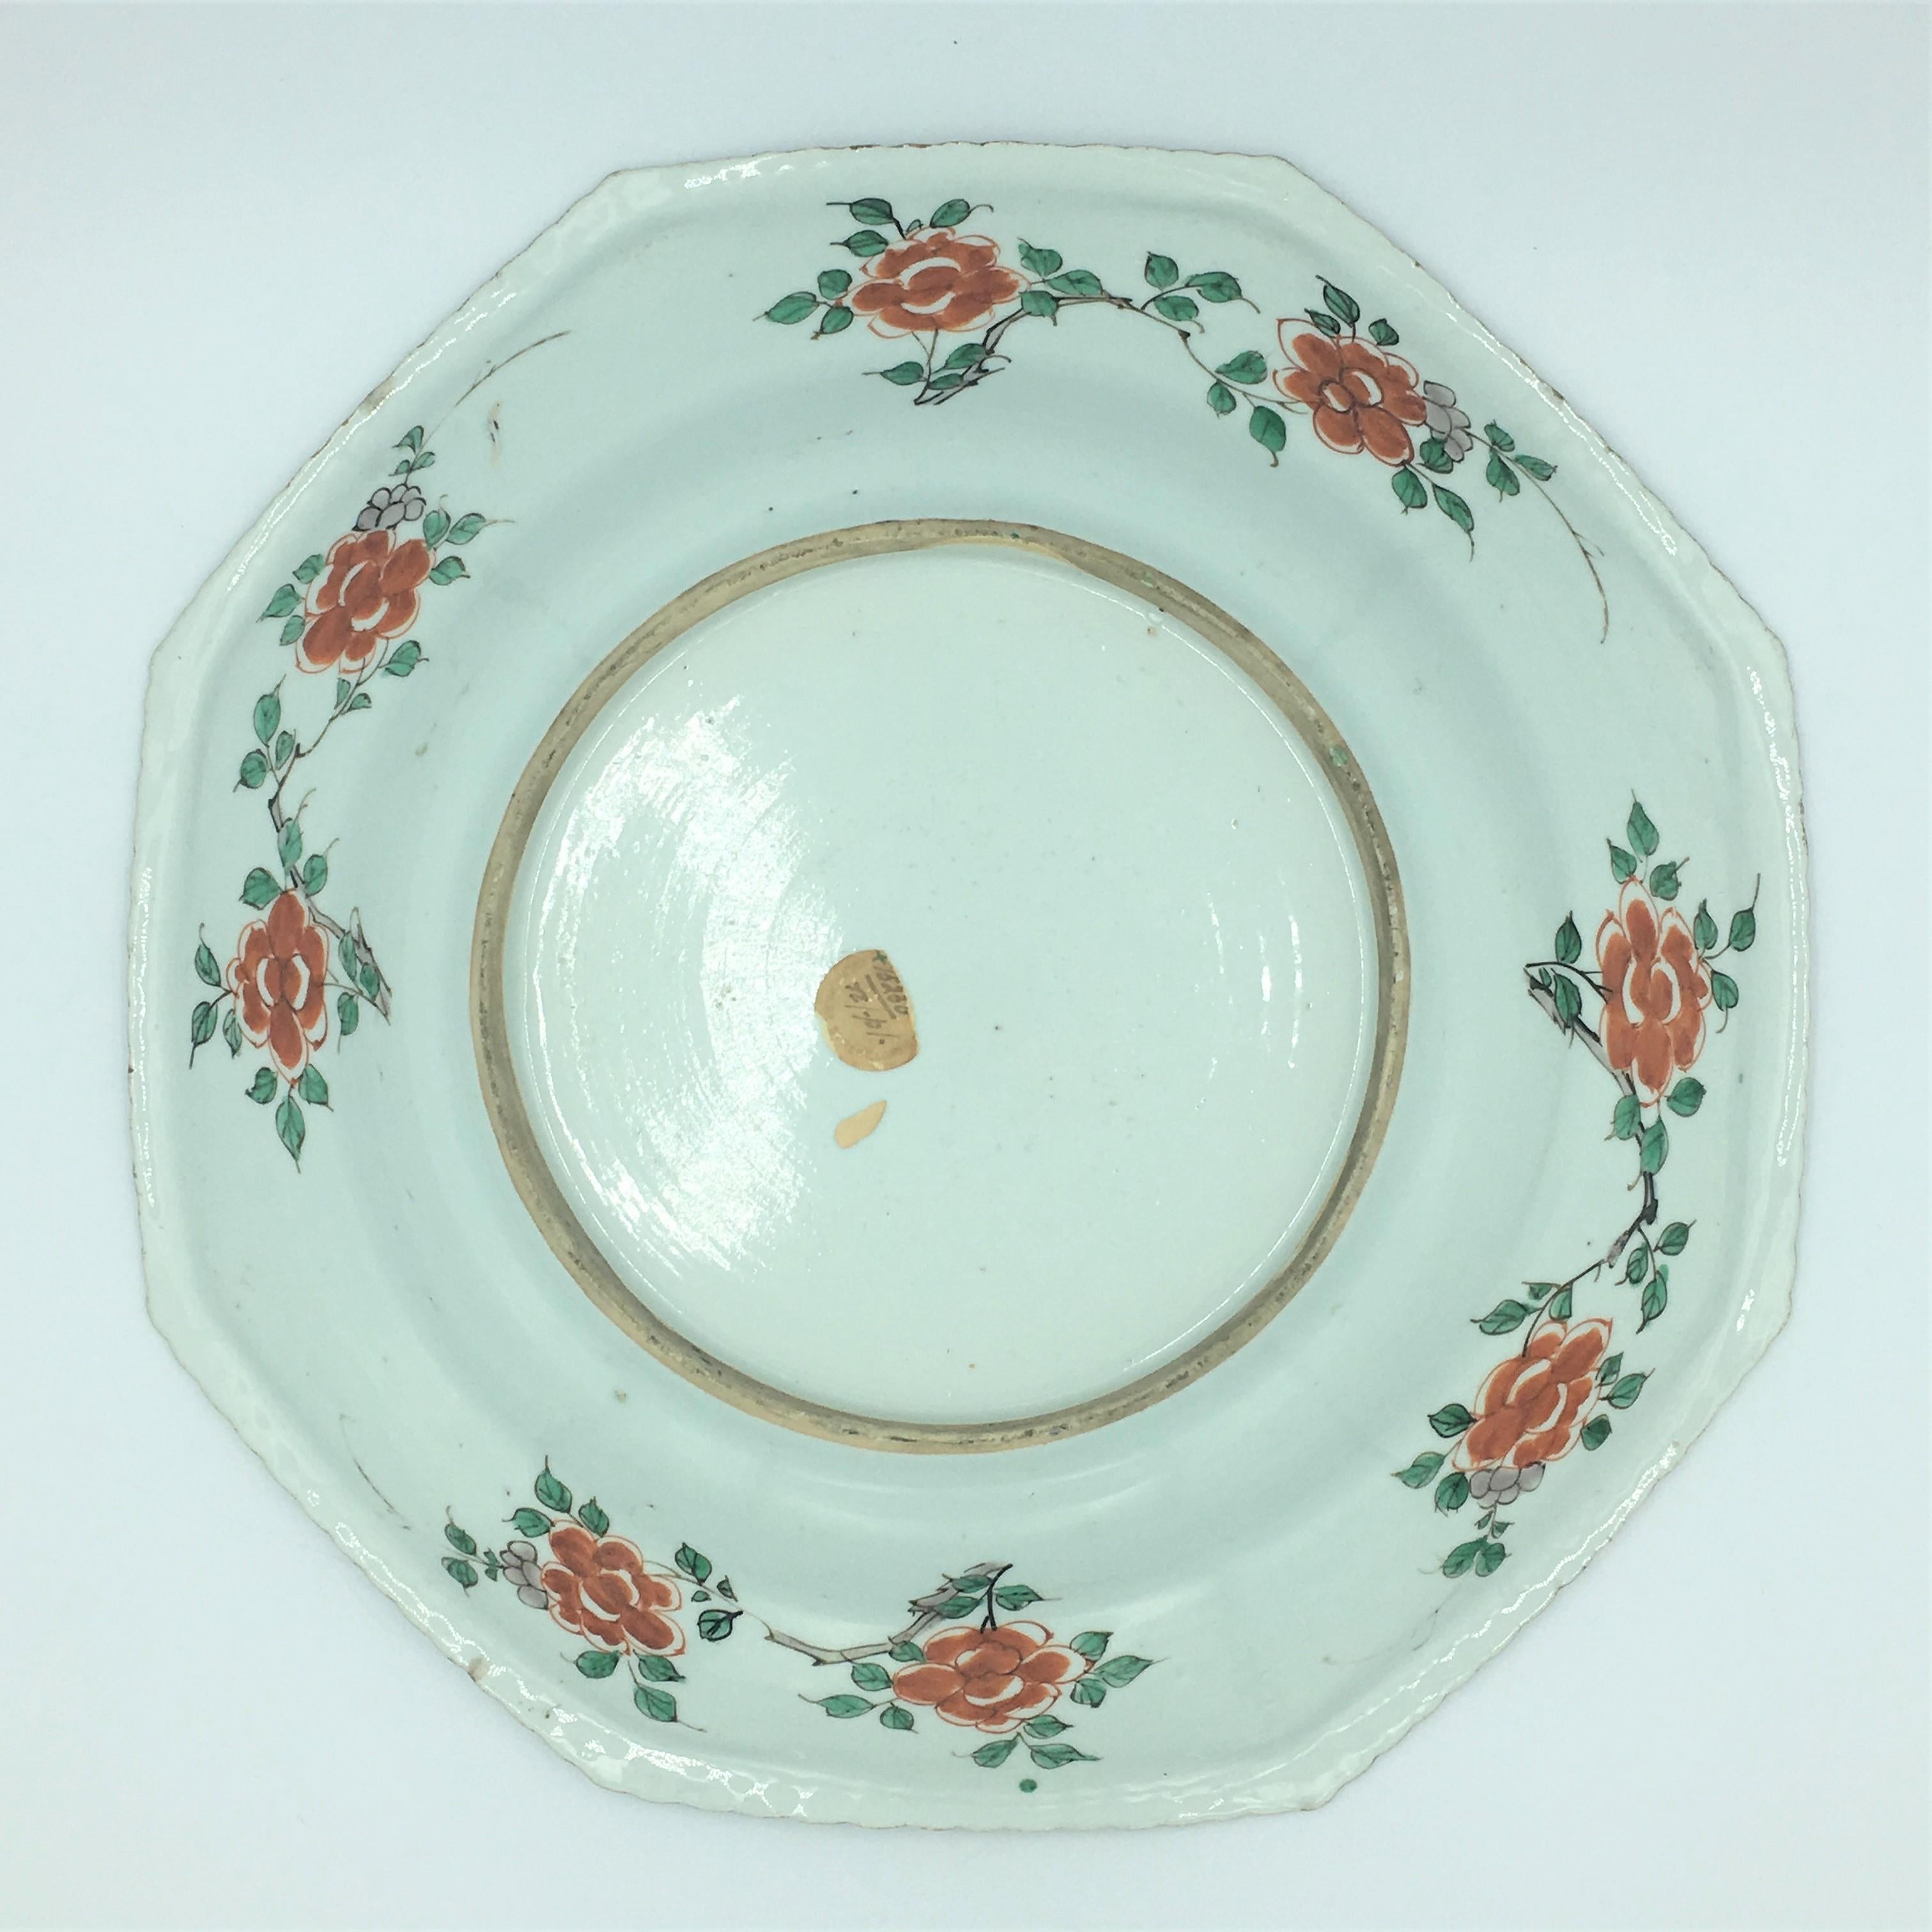 Kangxi period 1662-1722
A Chinese Kangxi period Famille Verte octagonal dish having fine enamel decoration throughout. Two courting birds in a garden, which is framed by phoenix’s and peony’s in the octagonal piecrust border. This is the smaller